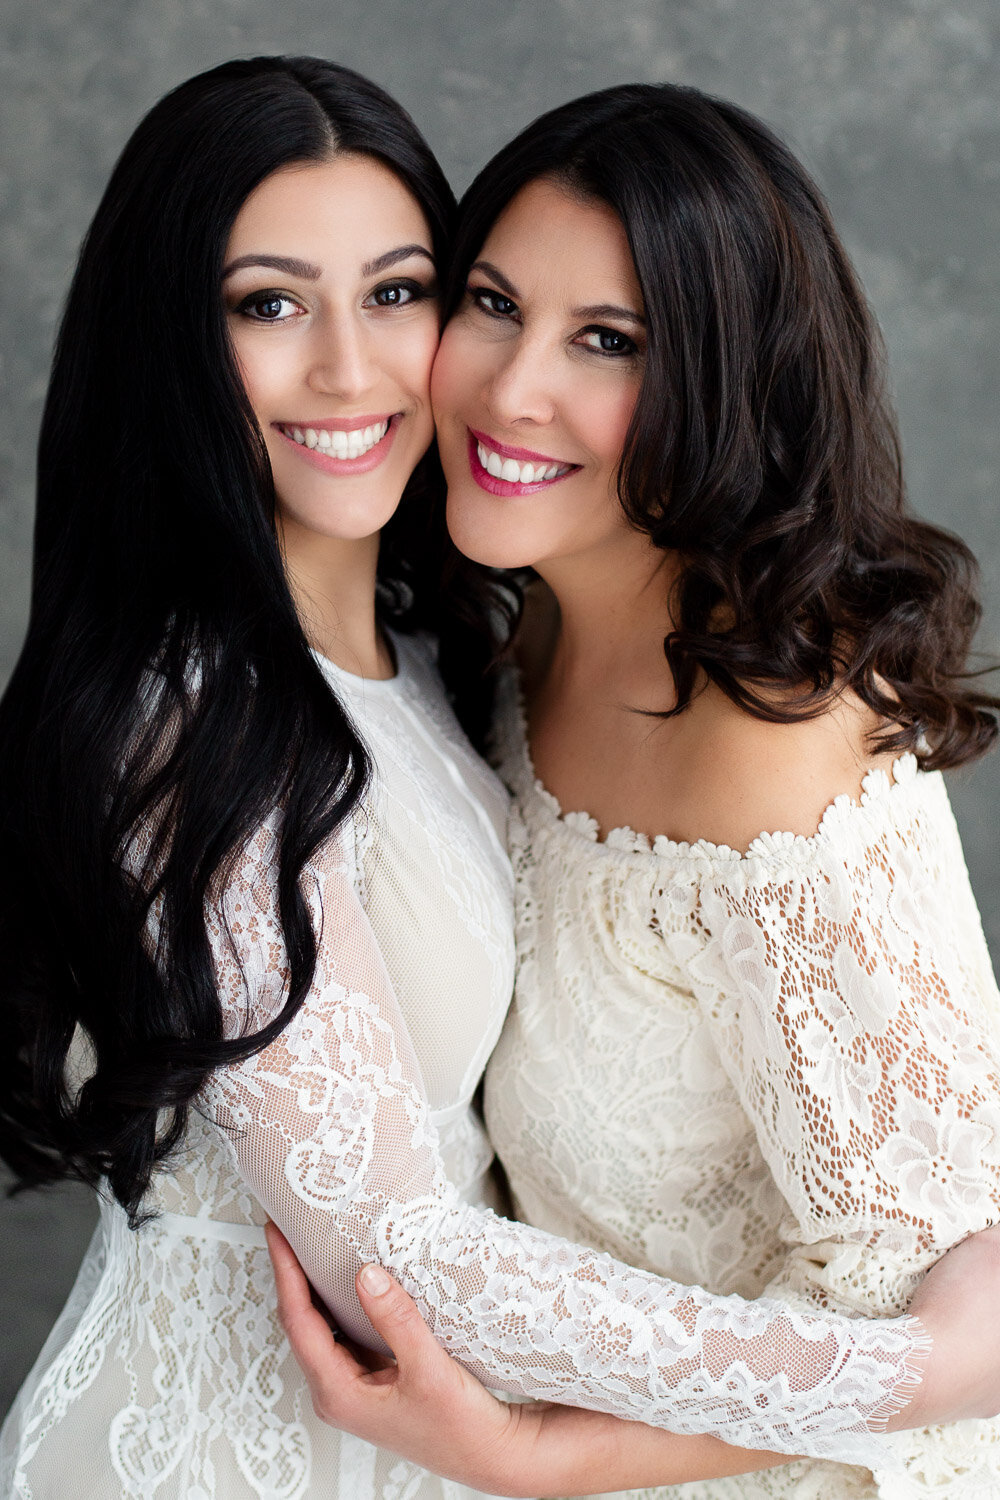 Beauty portrait of mother and daughter in matching dresses